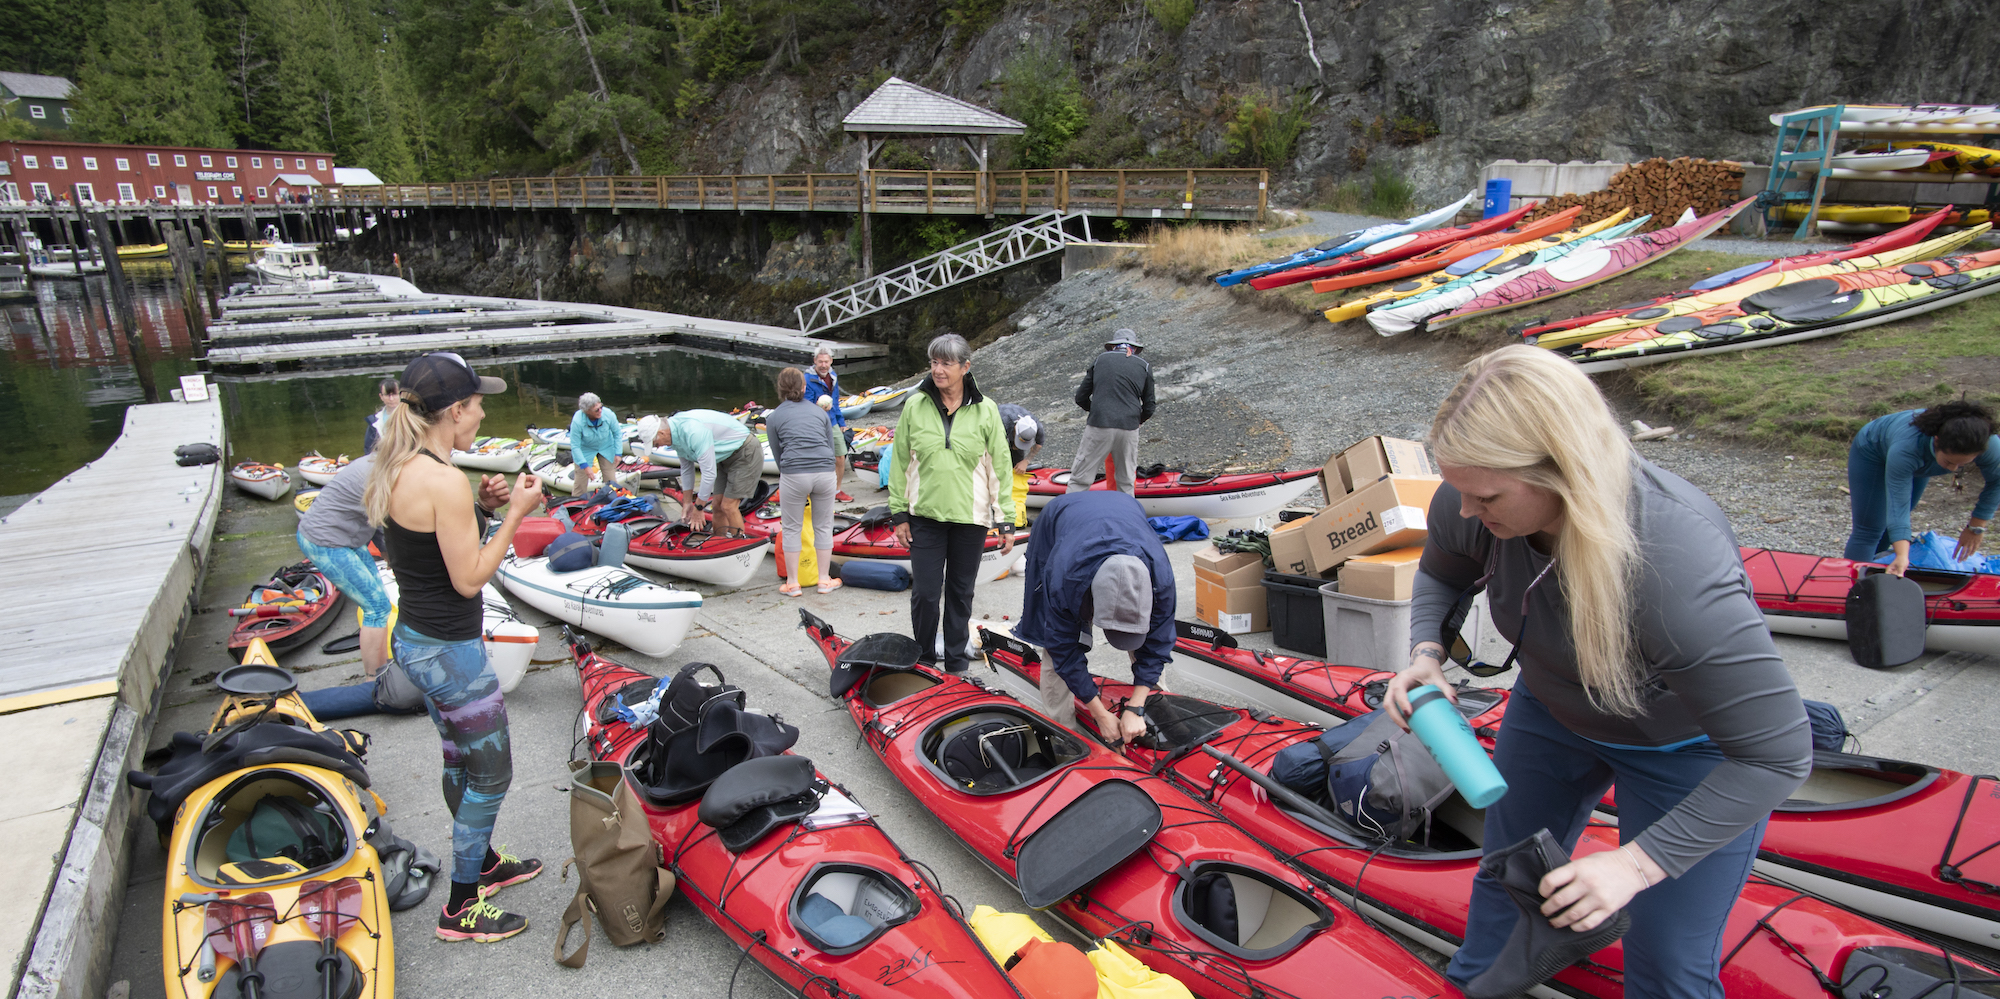 A group of sea kayakers packing their hatches and getting ready for a week on the water at a dock in British Columbia